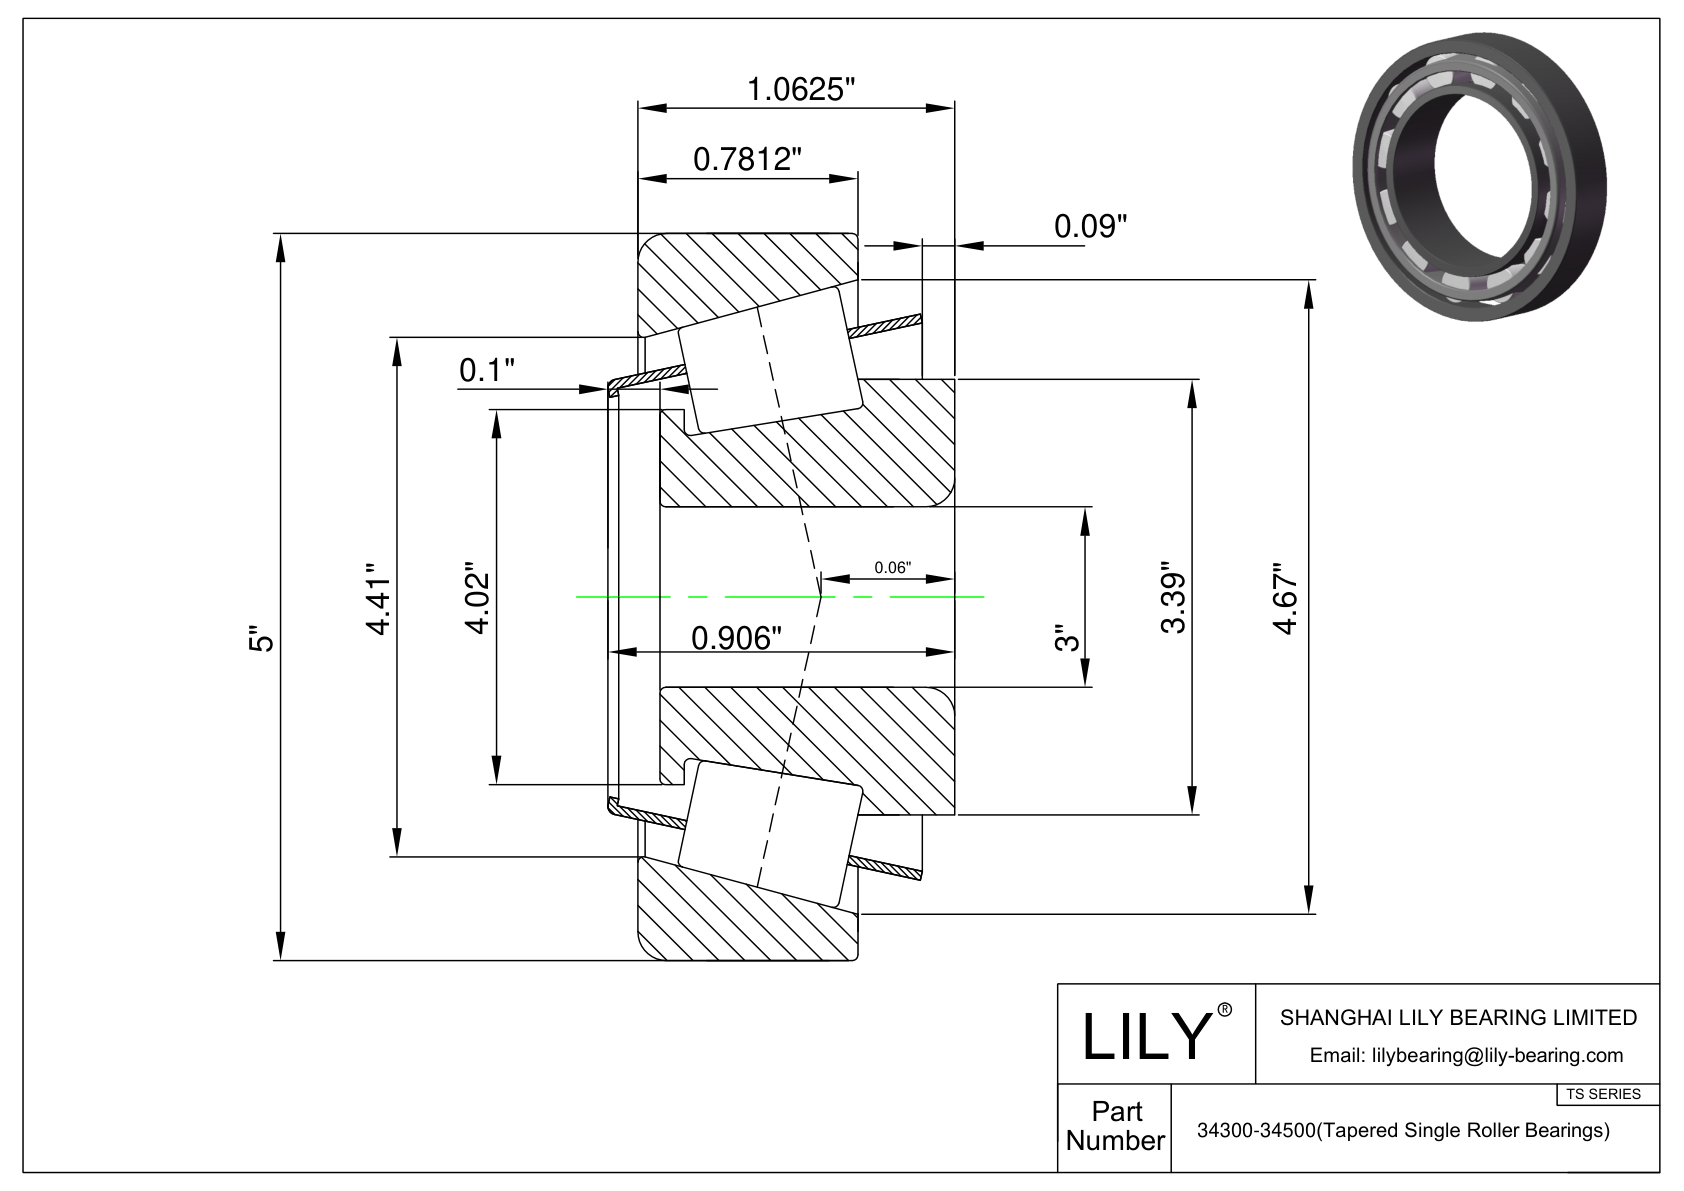 34300-34500 TS (Tapered Single Roller Bearings) (Imperial) cad drawing